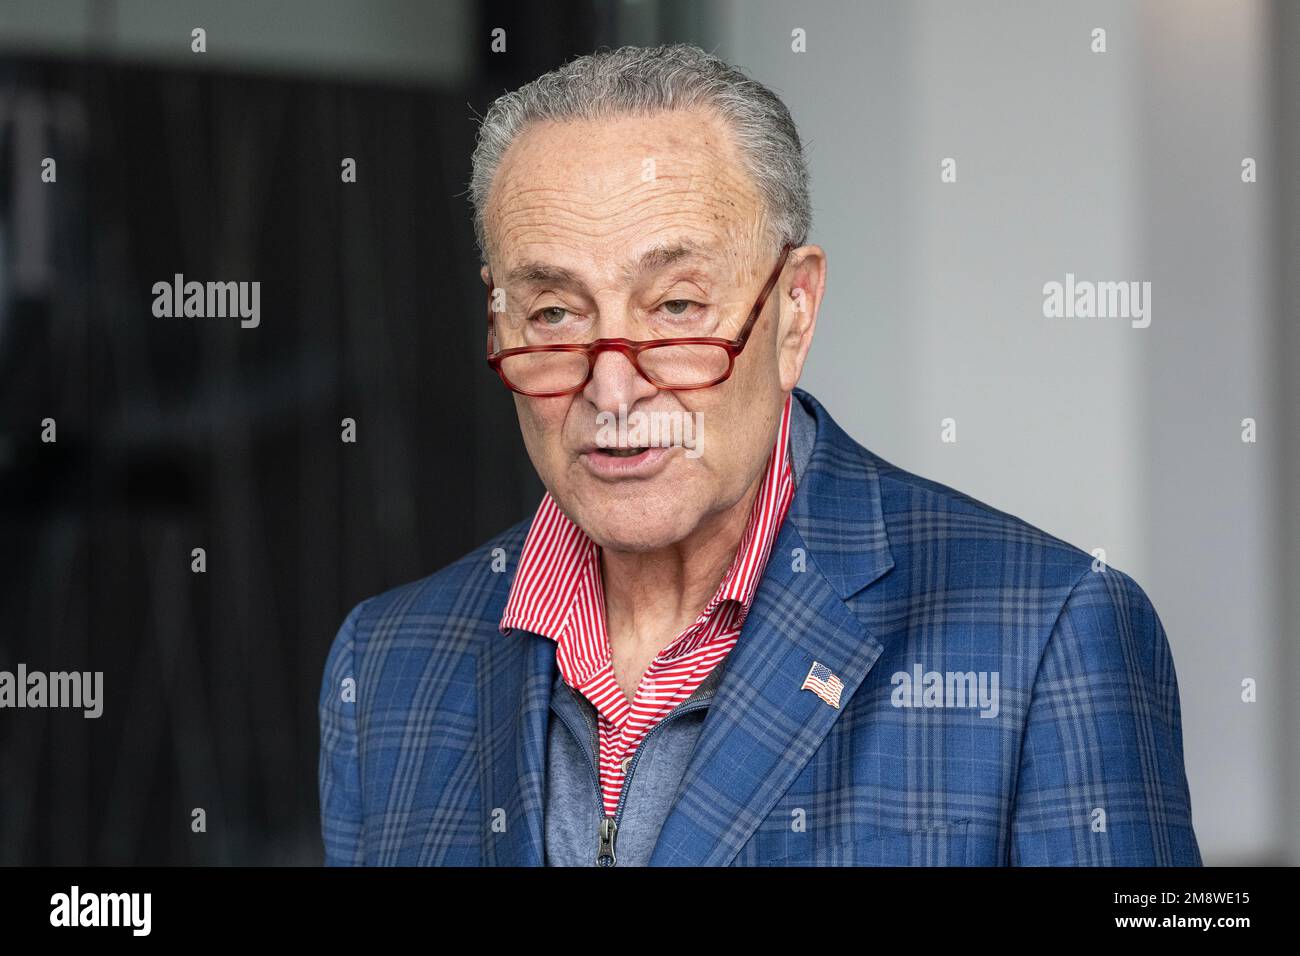 Senator Charles Schumer pushes during press briefing at lobby of 875 3rd avenue, New York on January 15, 2023 for confirmation of FAA Administrator choice by President Biden Stock Photo